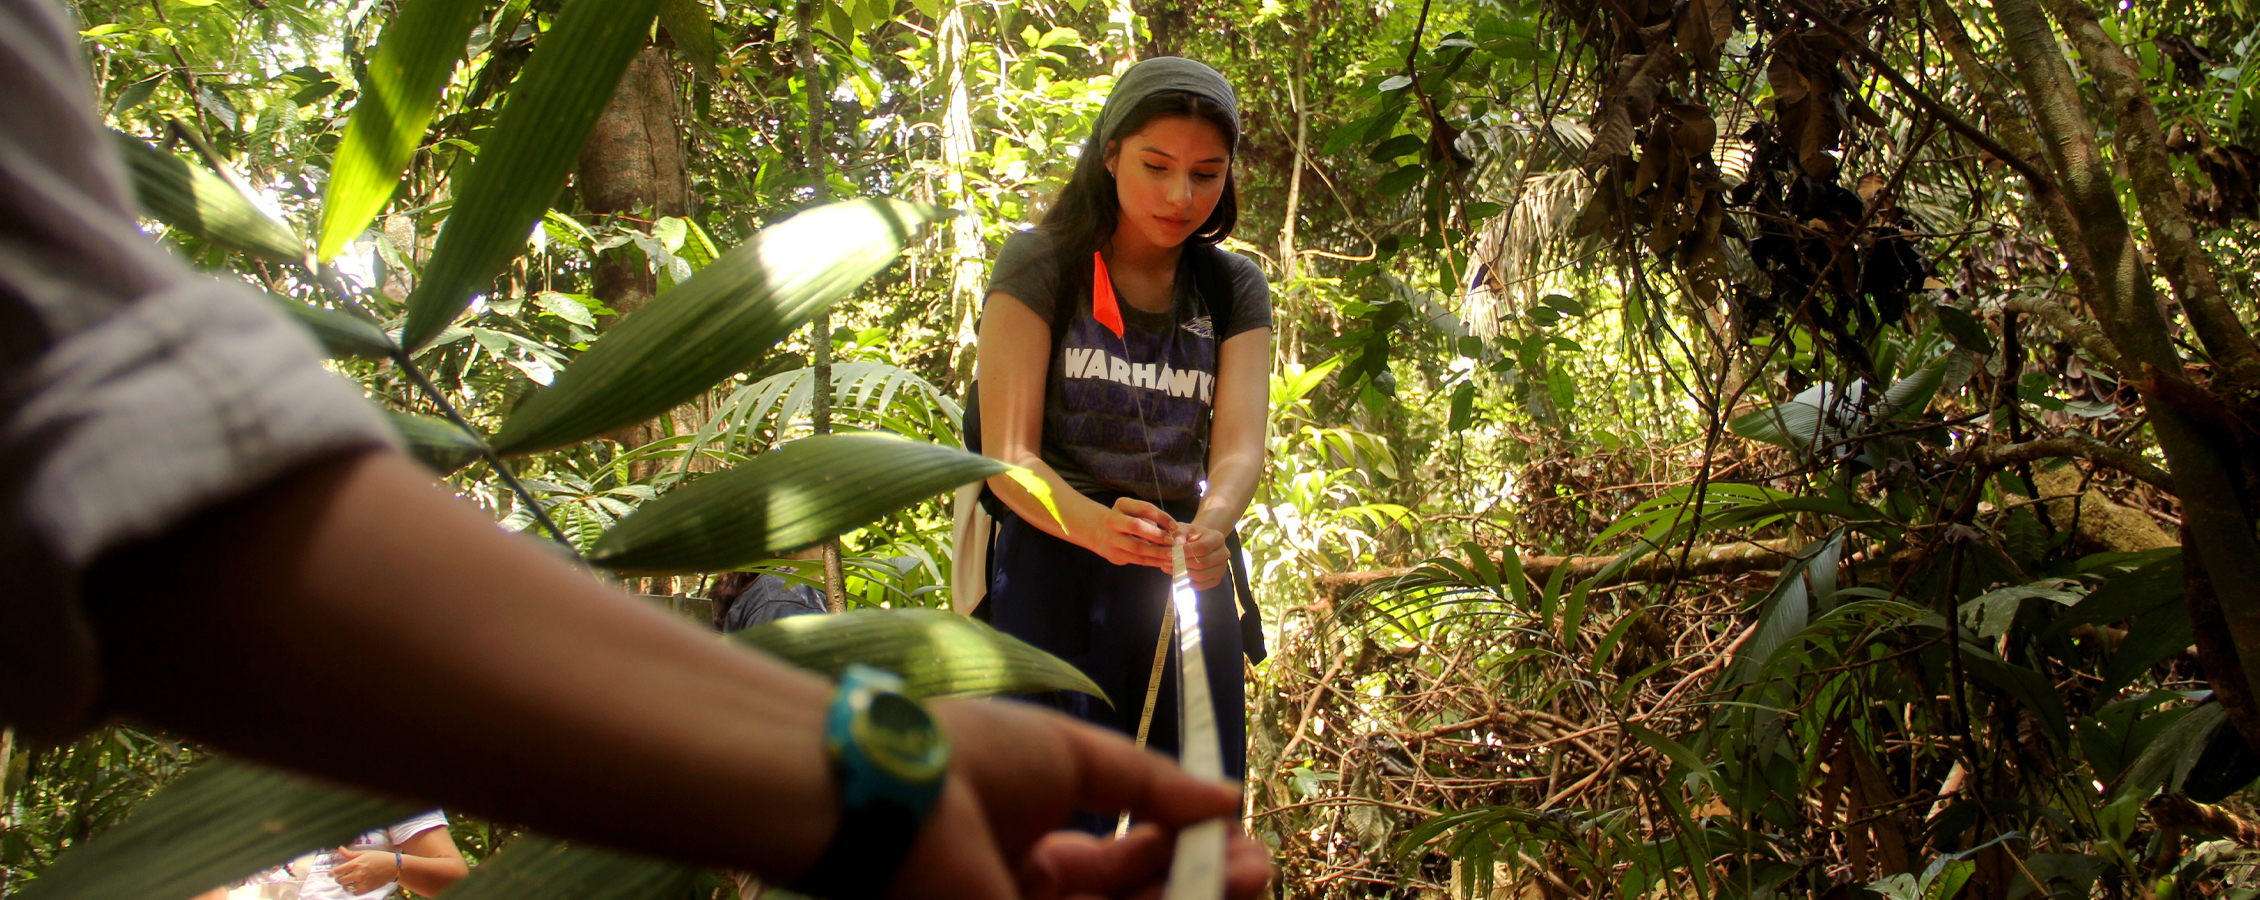 A person uses a measuring tool in the jungle.